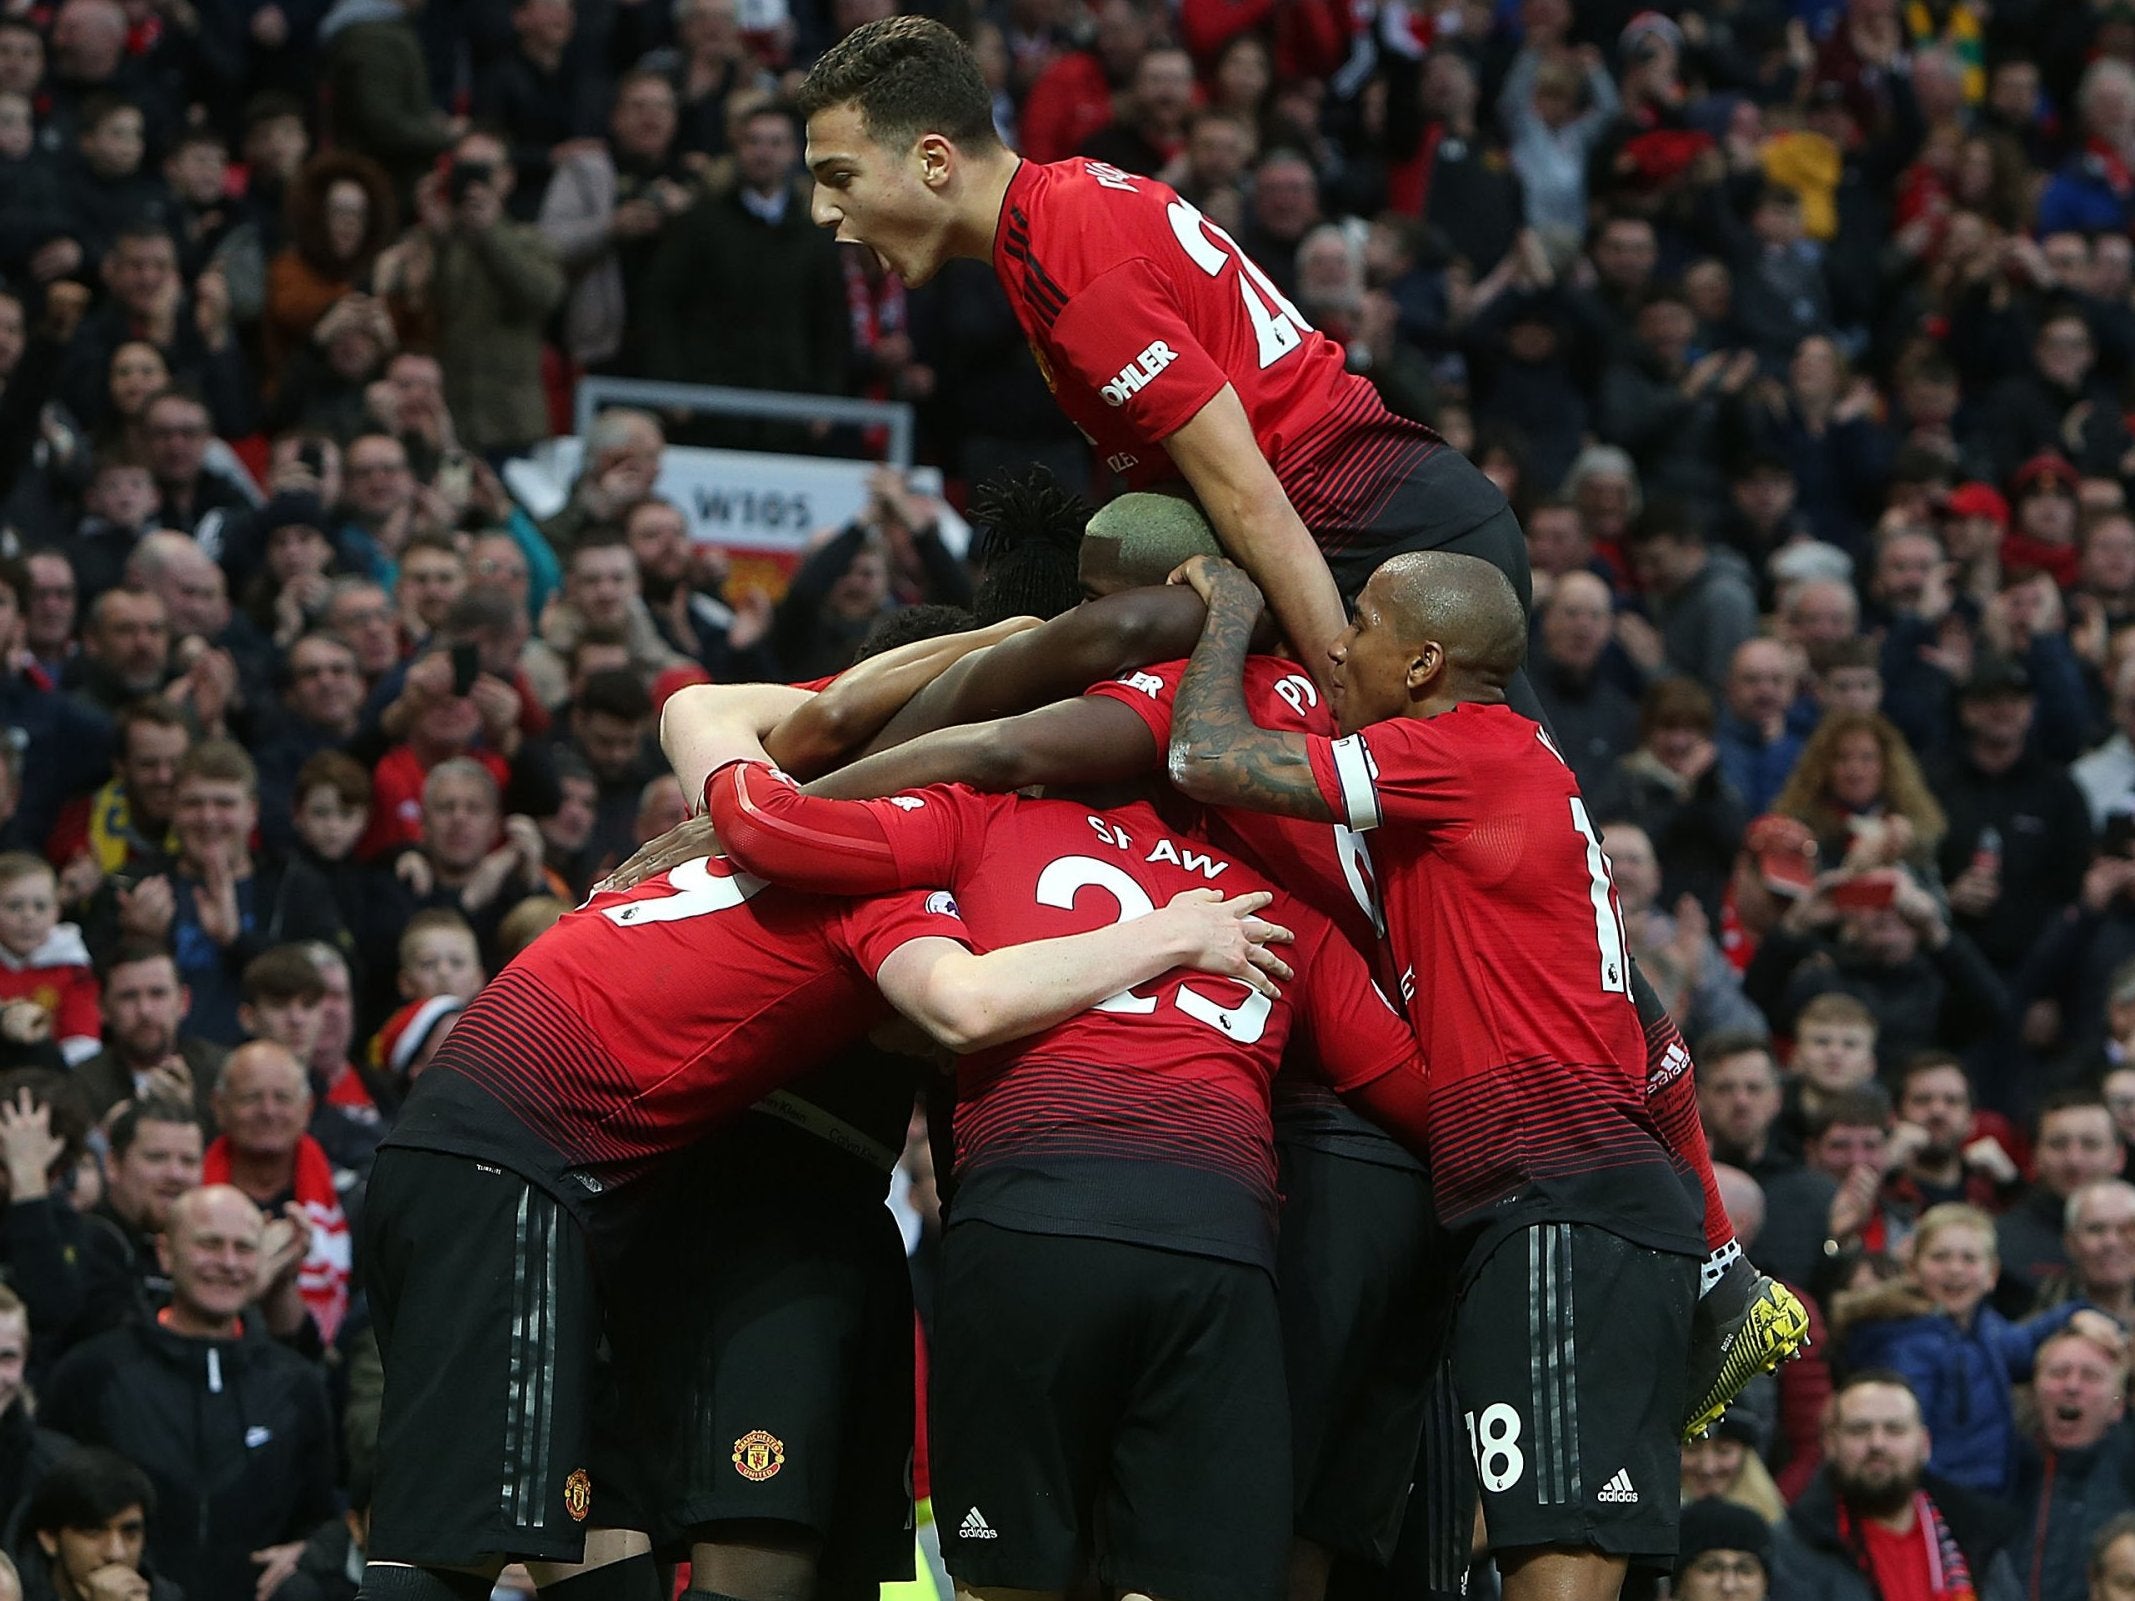 Manchester United showed character to hold off Southampton